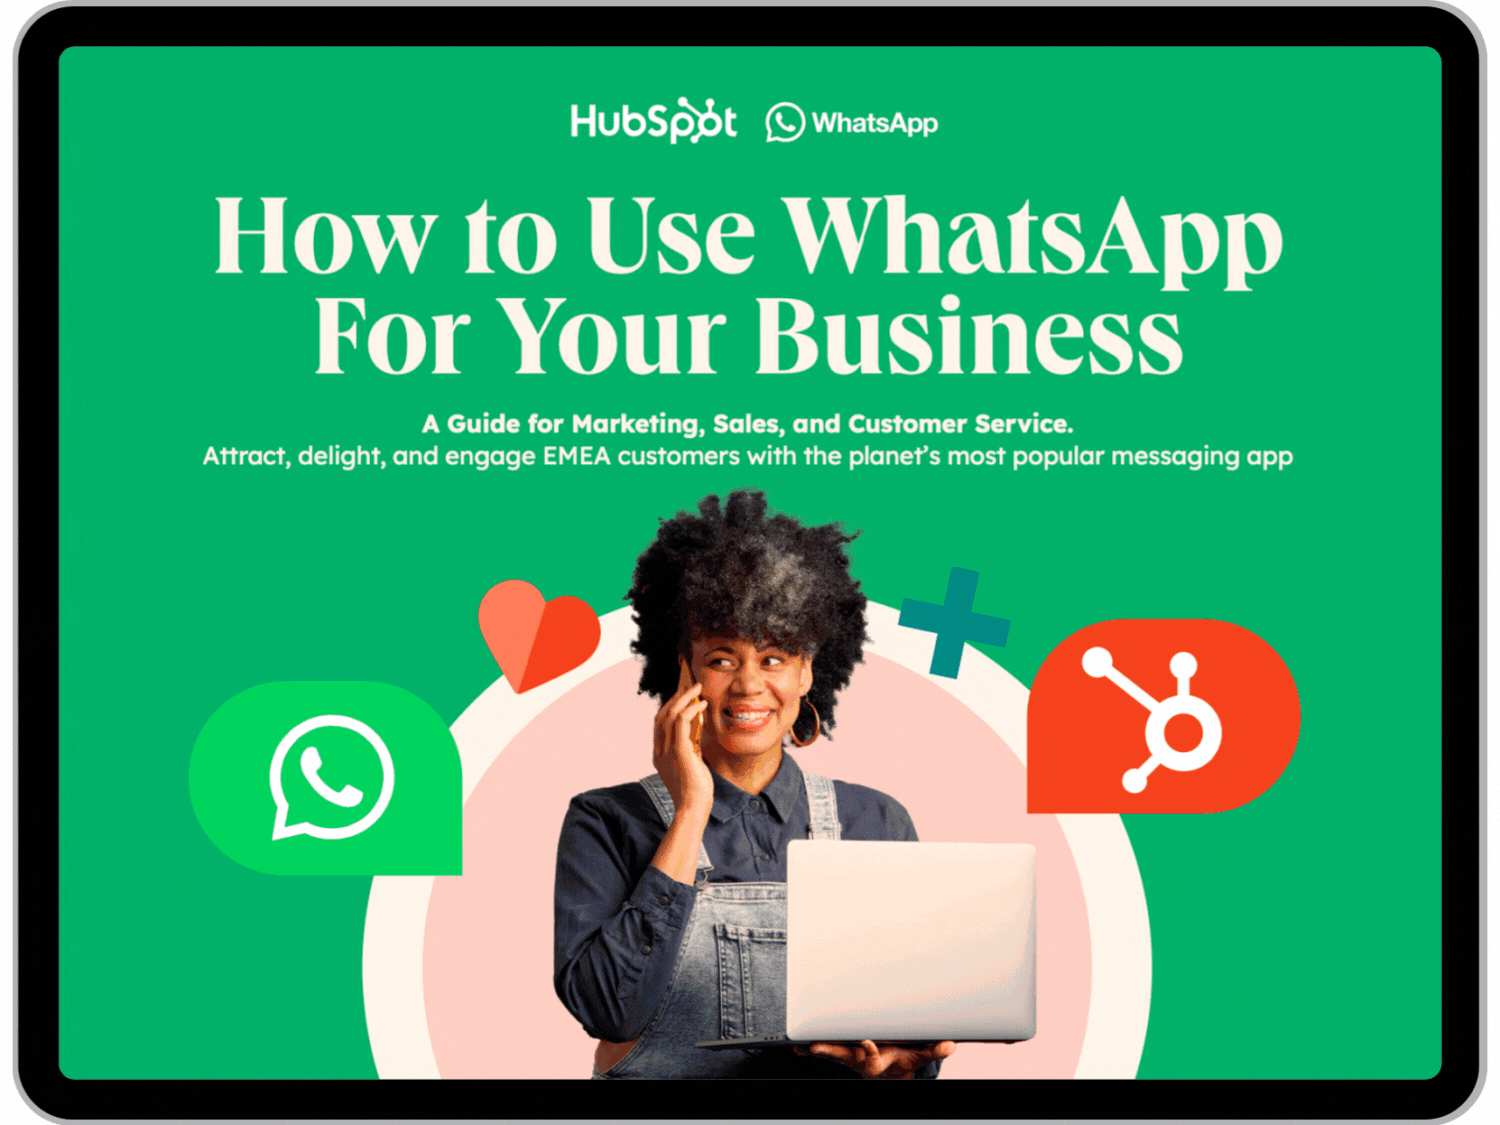 How to use WhatsApp for your business